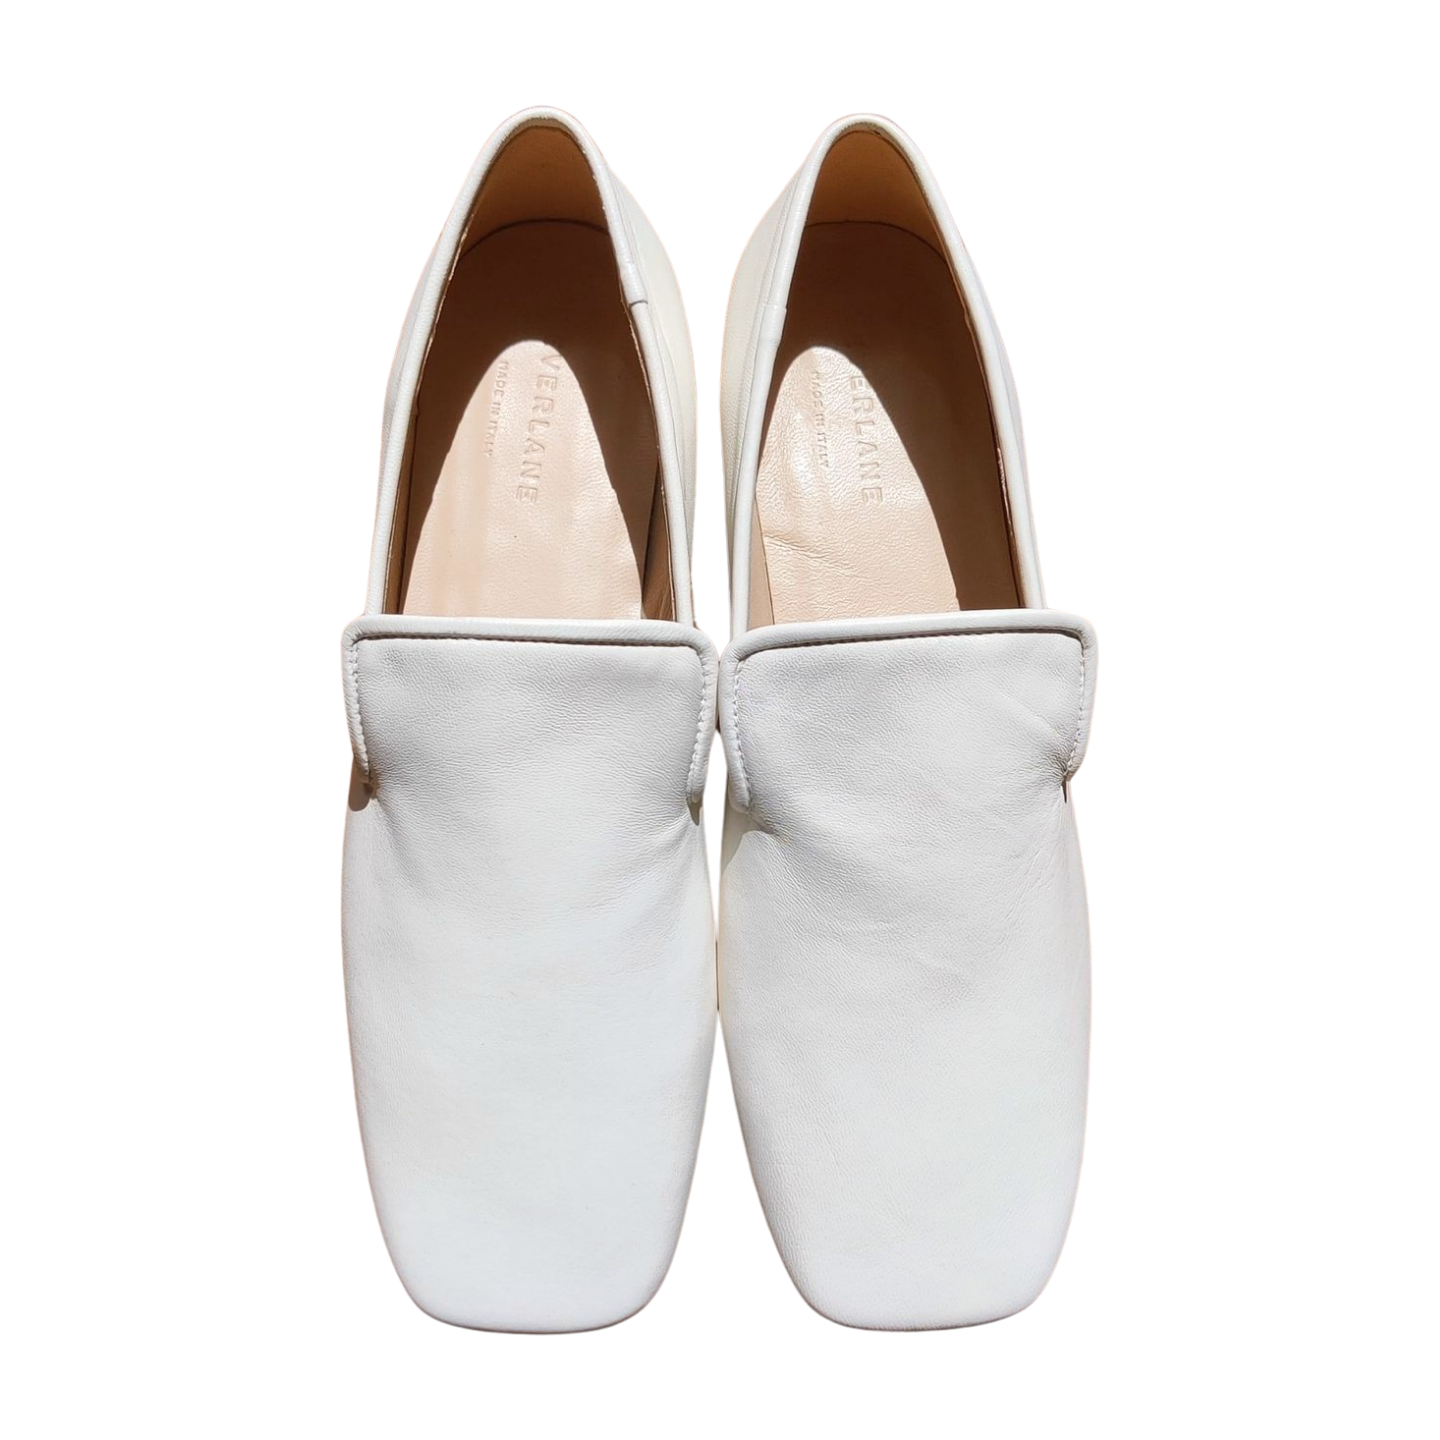 Everlane Loafers